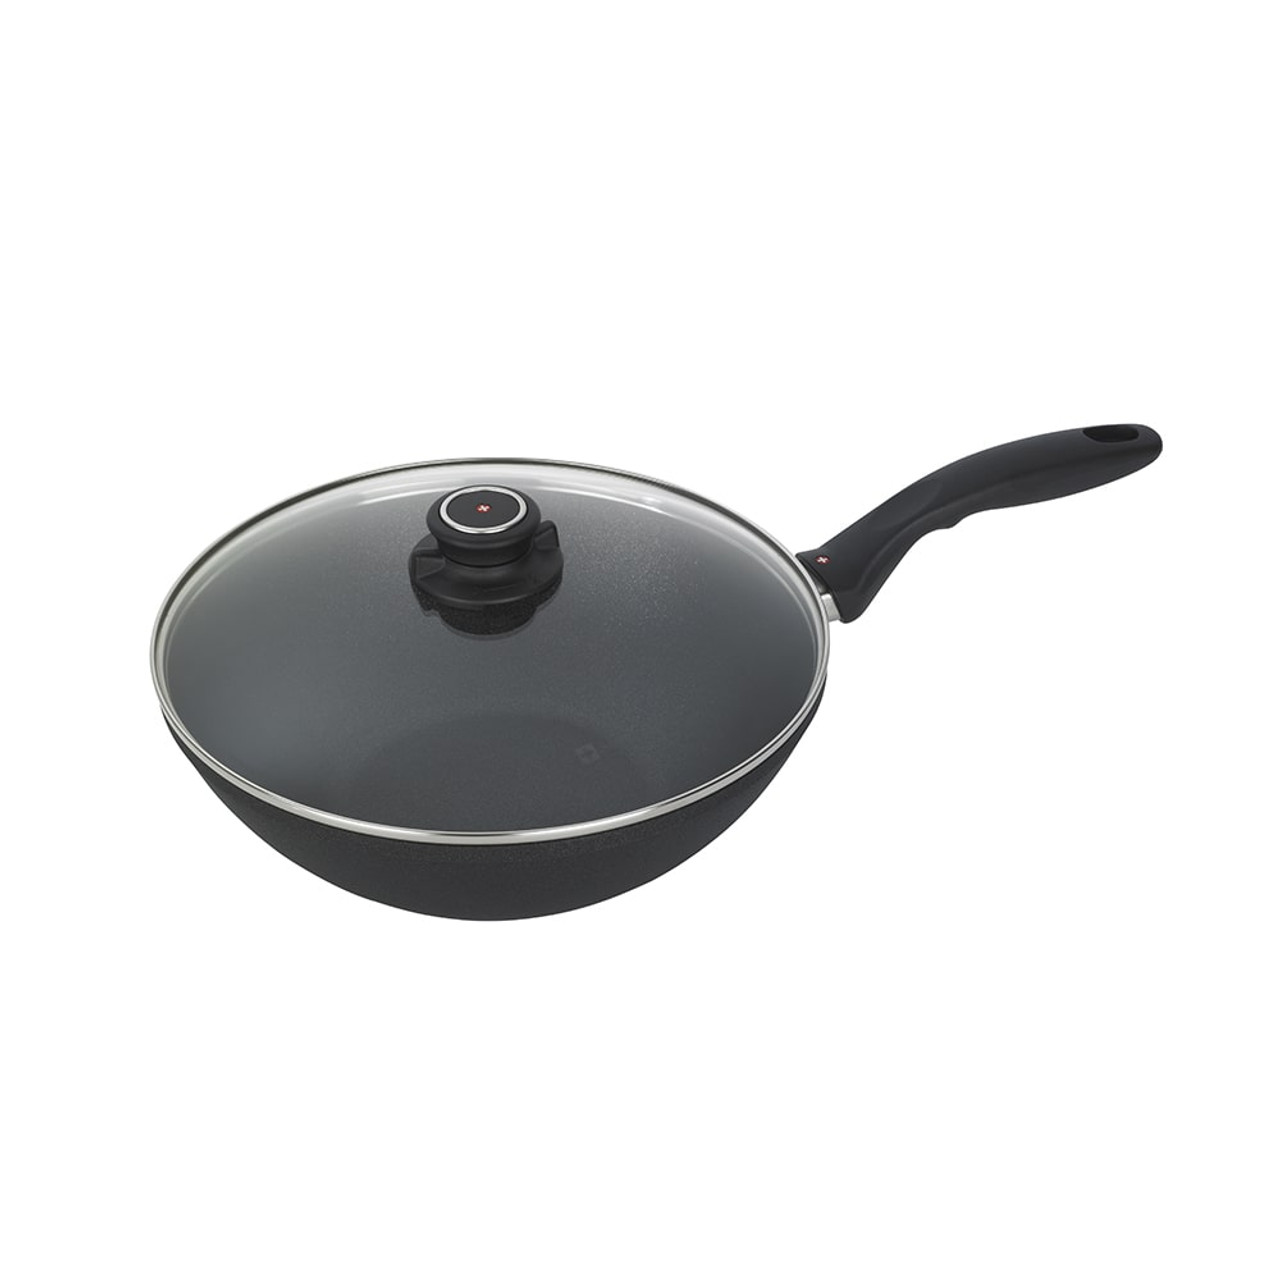 https://cdn11.bigcommerce.com/s-hccytny0od/images/stencil/1280x1280/products/3606/12867/swiss-diamond-xd-nonstick-wok-11in__93344.1601476583.jpg?c=2?imbypass=on